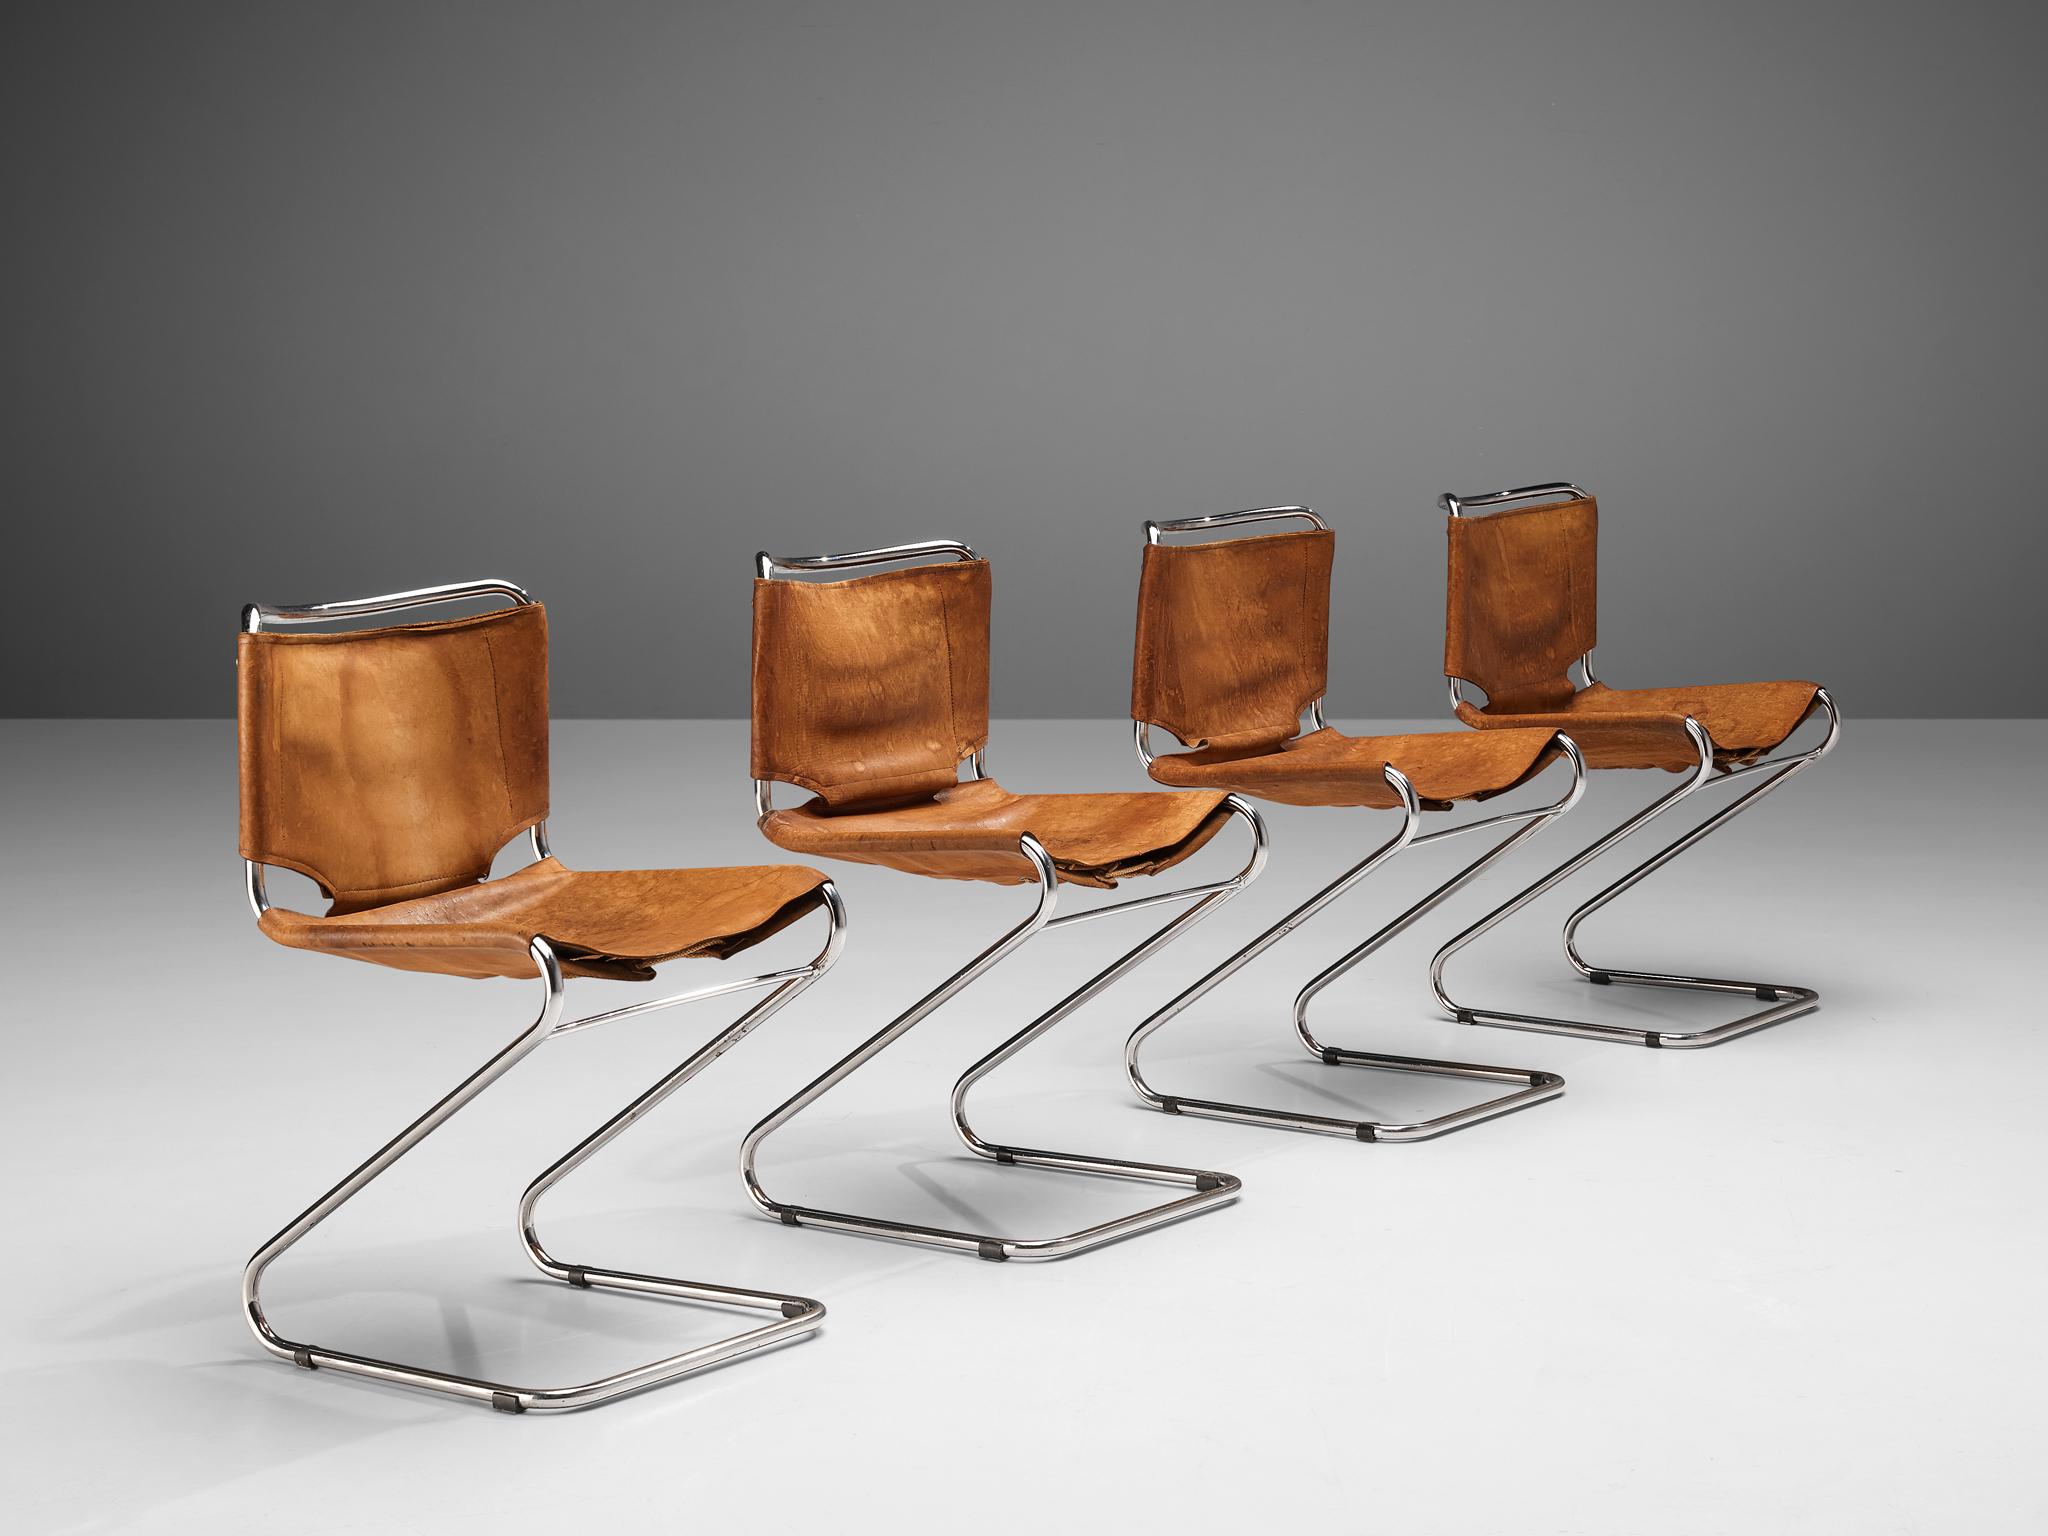 Pascal Mourgue for Steiner, set of 4 'Biscia' dining chairs, steel, cognac leather, France, 1960s.

Set of four 'Biscia' cantilever chairs in patinated cognac leather designed by Pascal Mourgue. These chairs have a very dynamic appearance due their